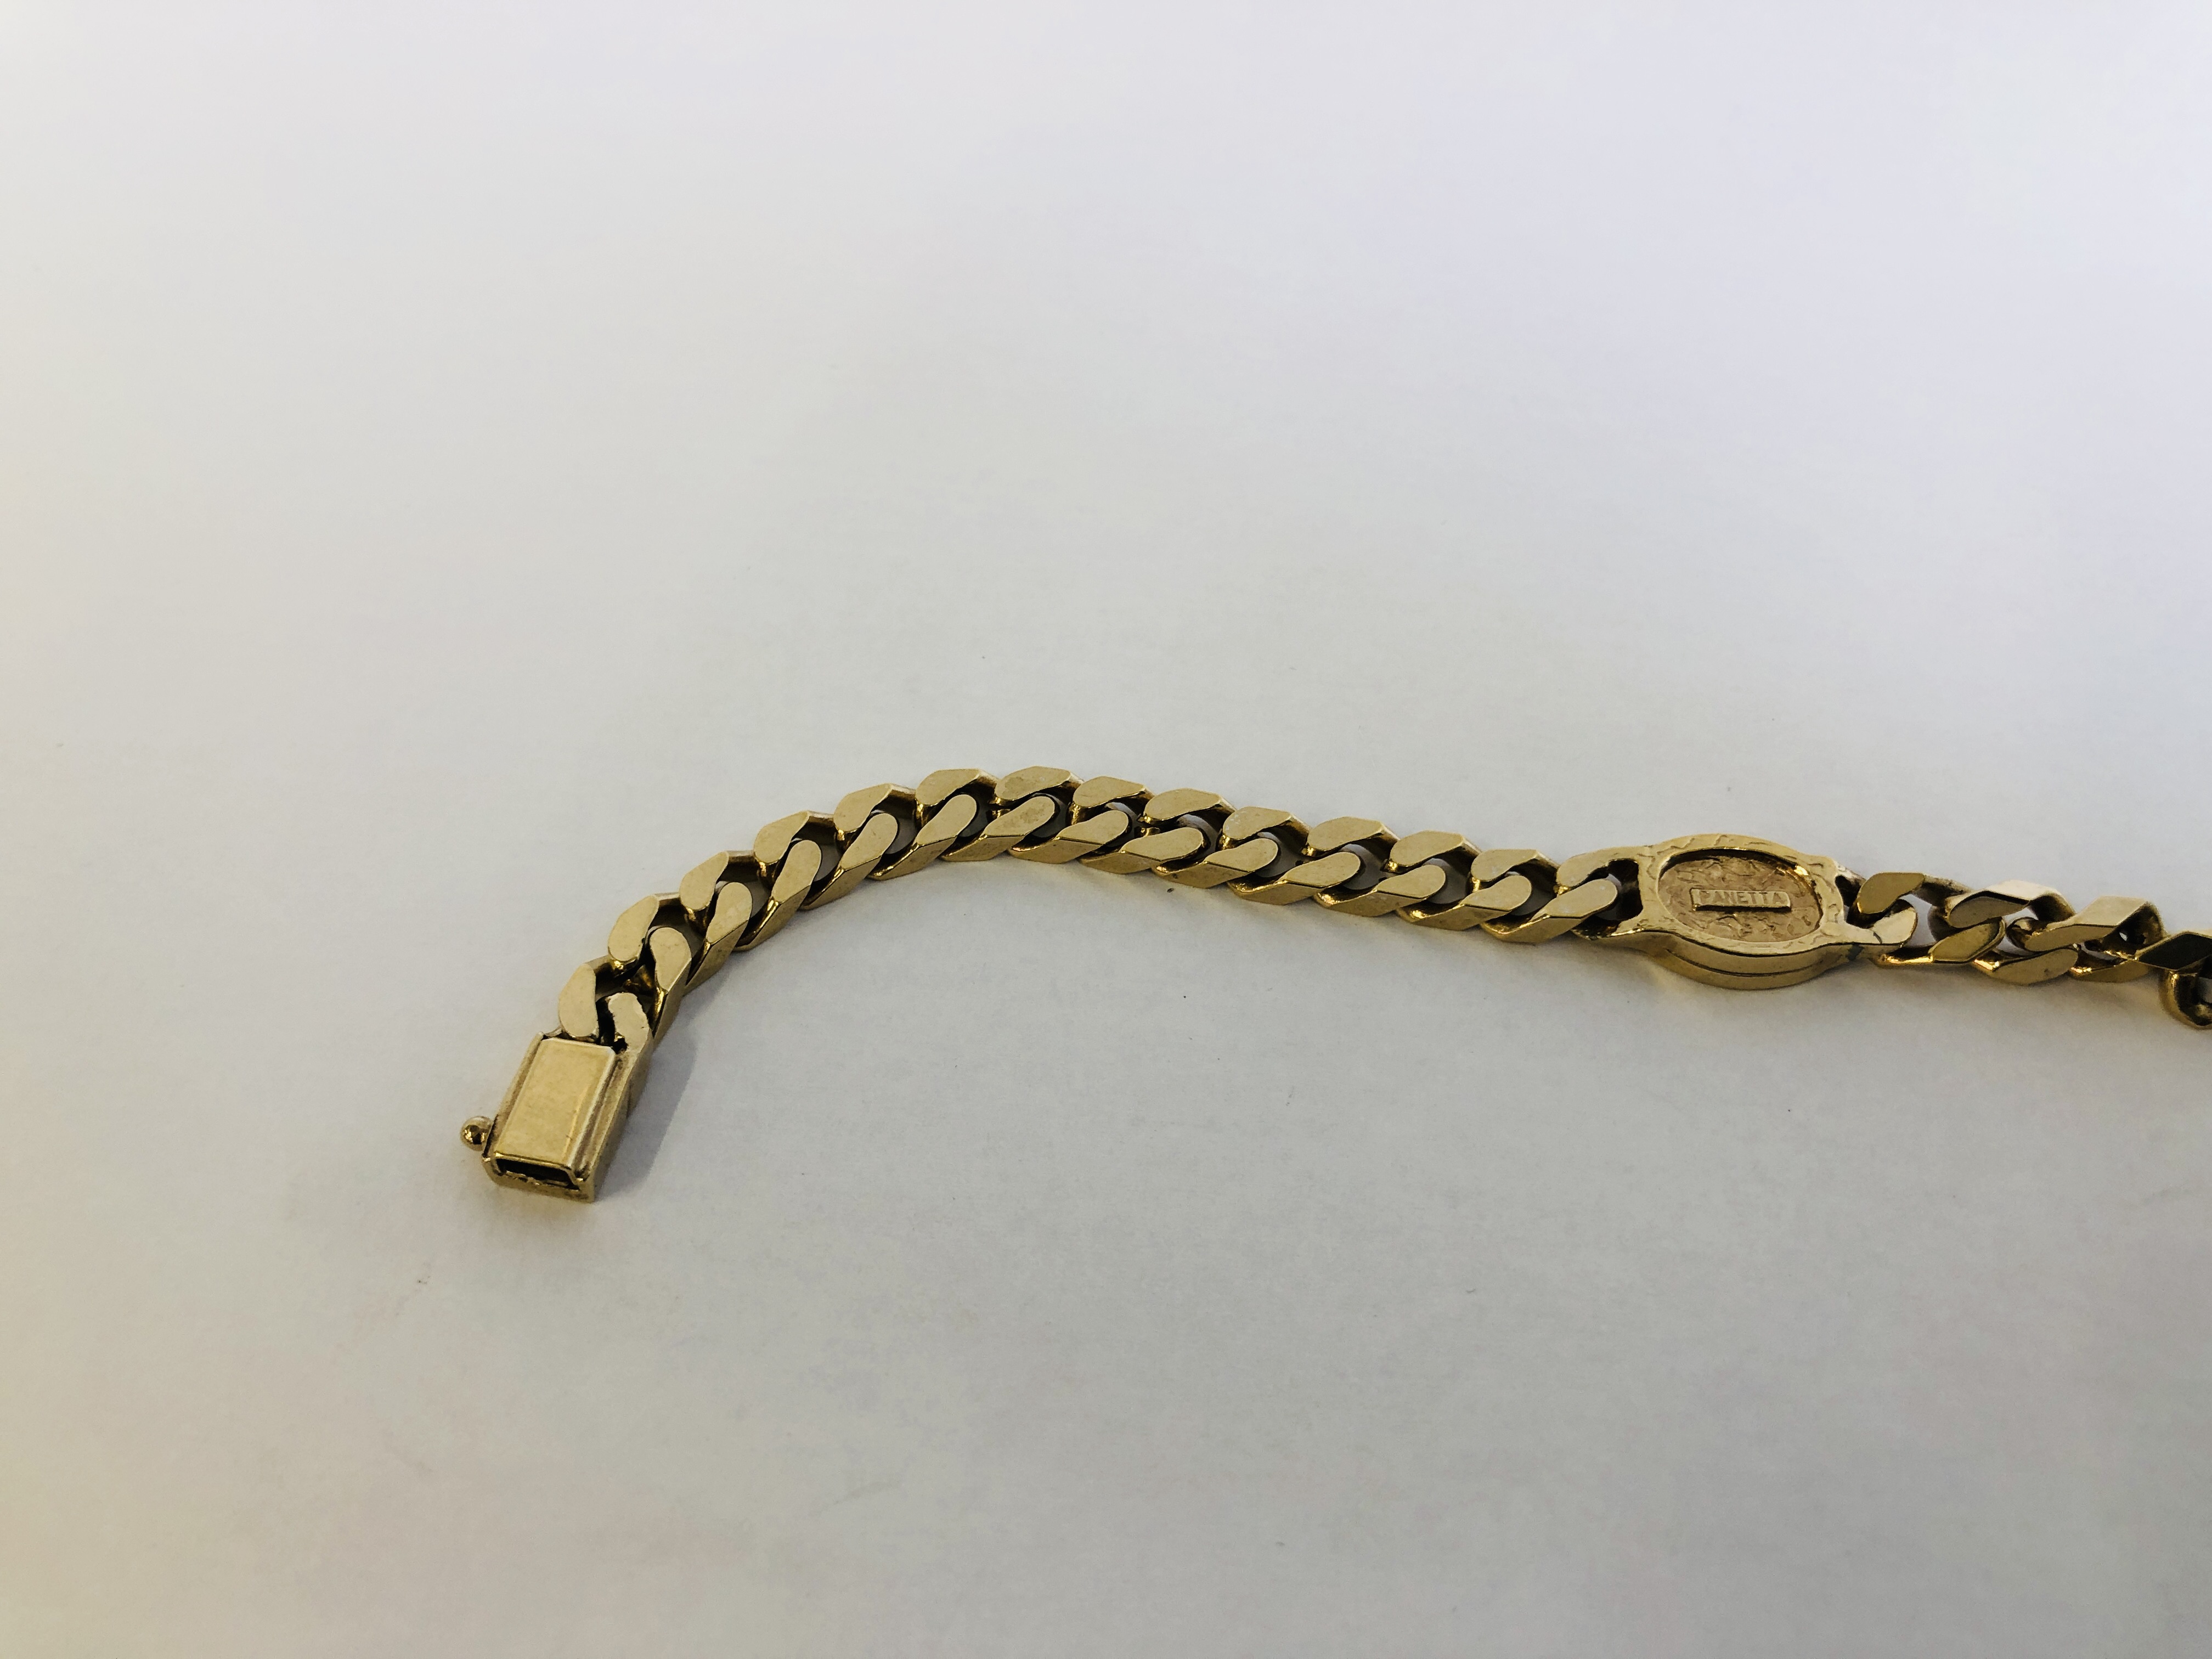 A GOLD TONE COSTUME BRACELET MARKED "PANETTA" ALONG WITH AN UNMARKED ROPE TWIST NECKLACE. - Image 10 of 13